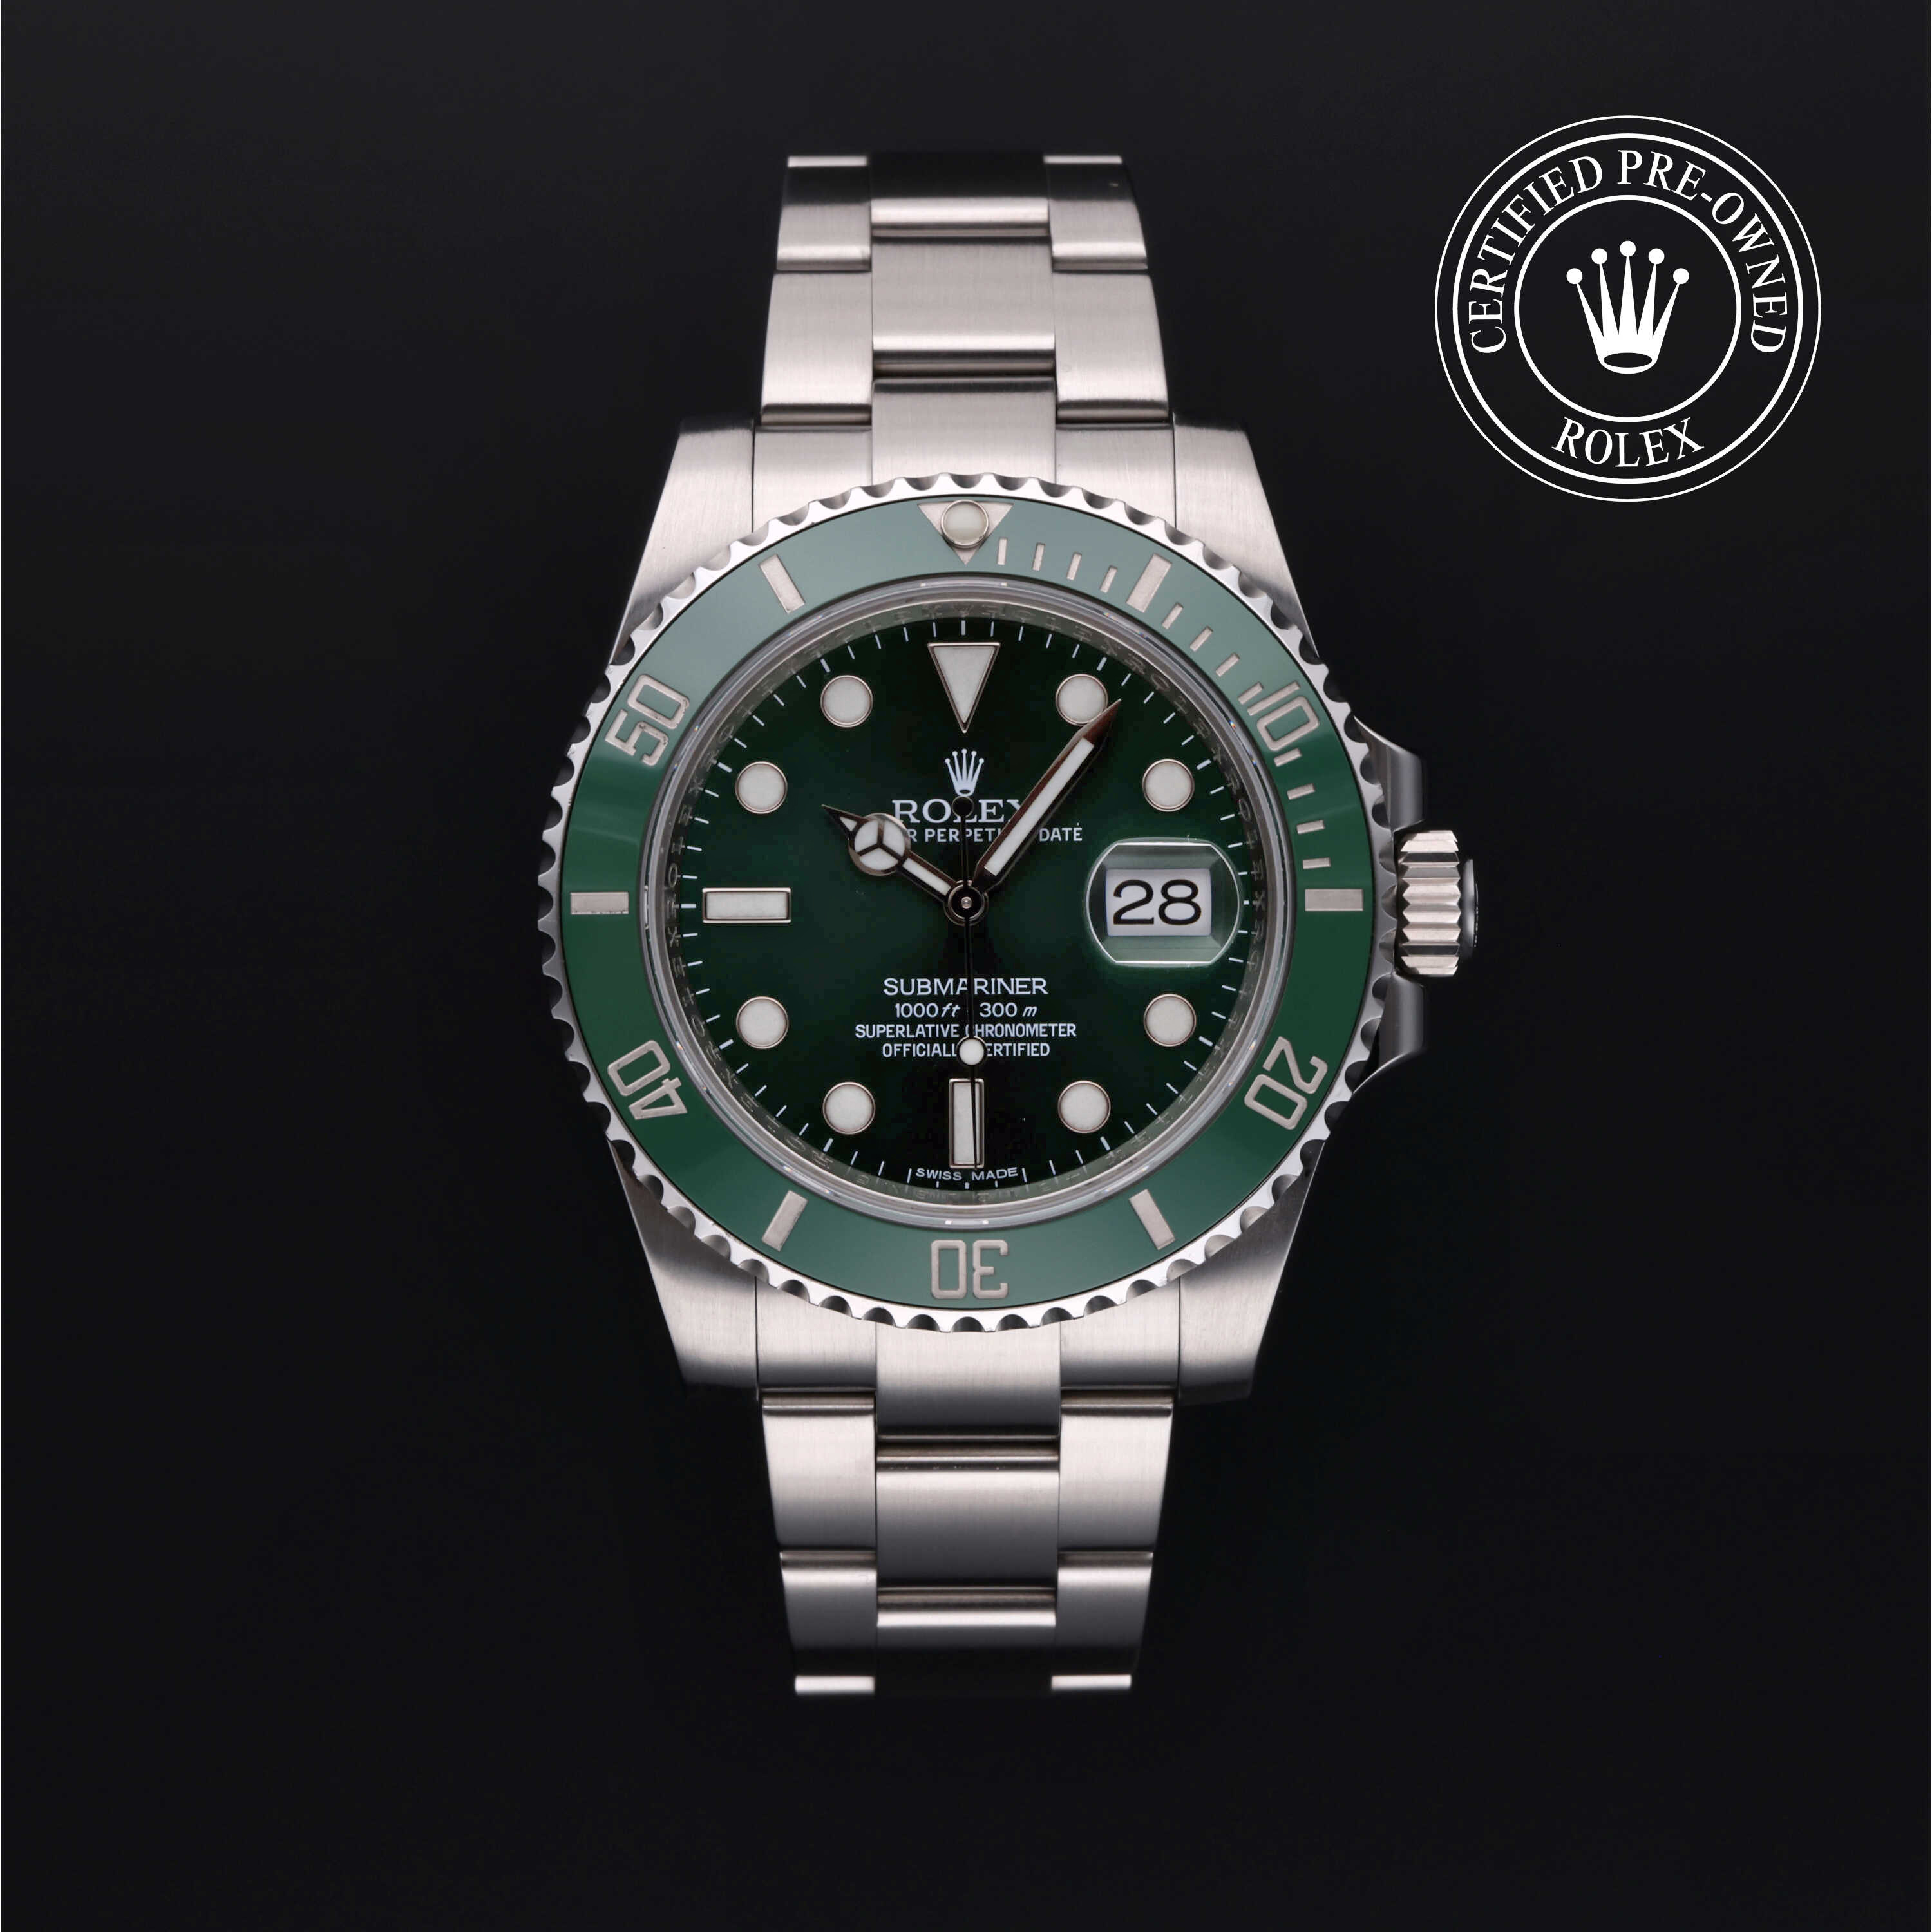 Rolex 116610LV Submariner Date - Pre-owned Luxury Watches